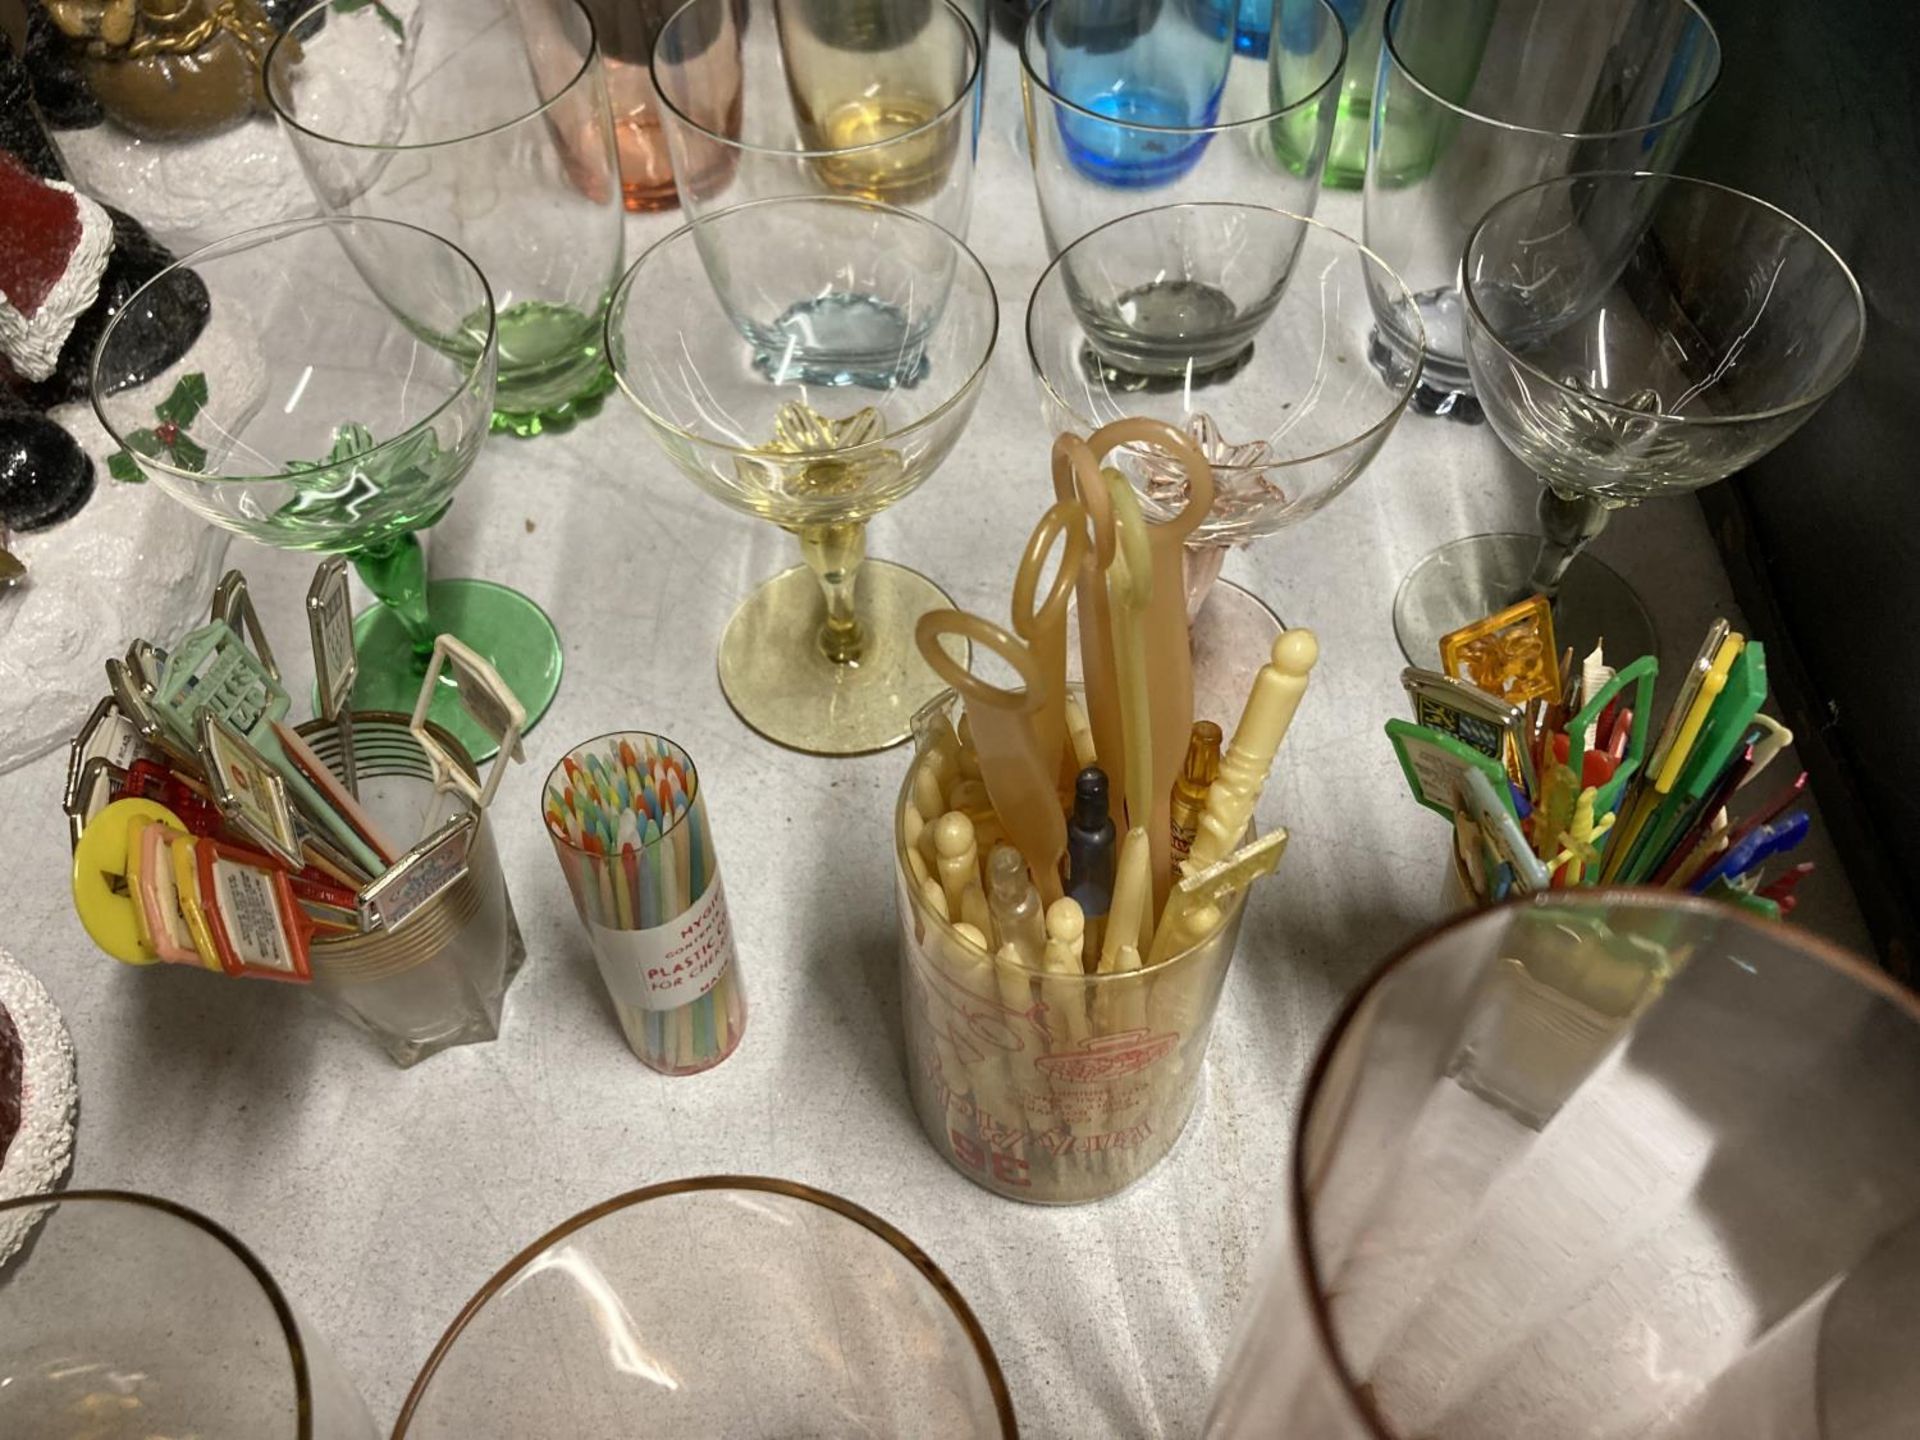 A QUANTITY OF COLOURED COCKTAIL GLASSES, TUMBLERS, COCKTAIL STICKS, ETC - Image 2 of 3